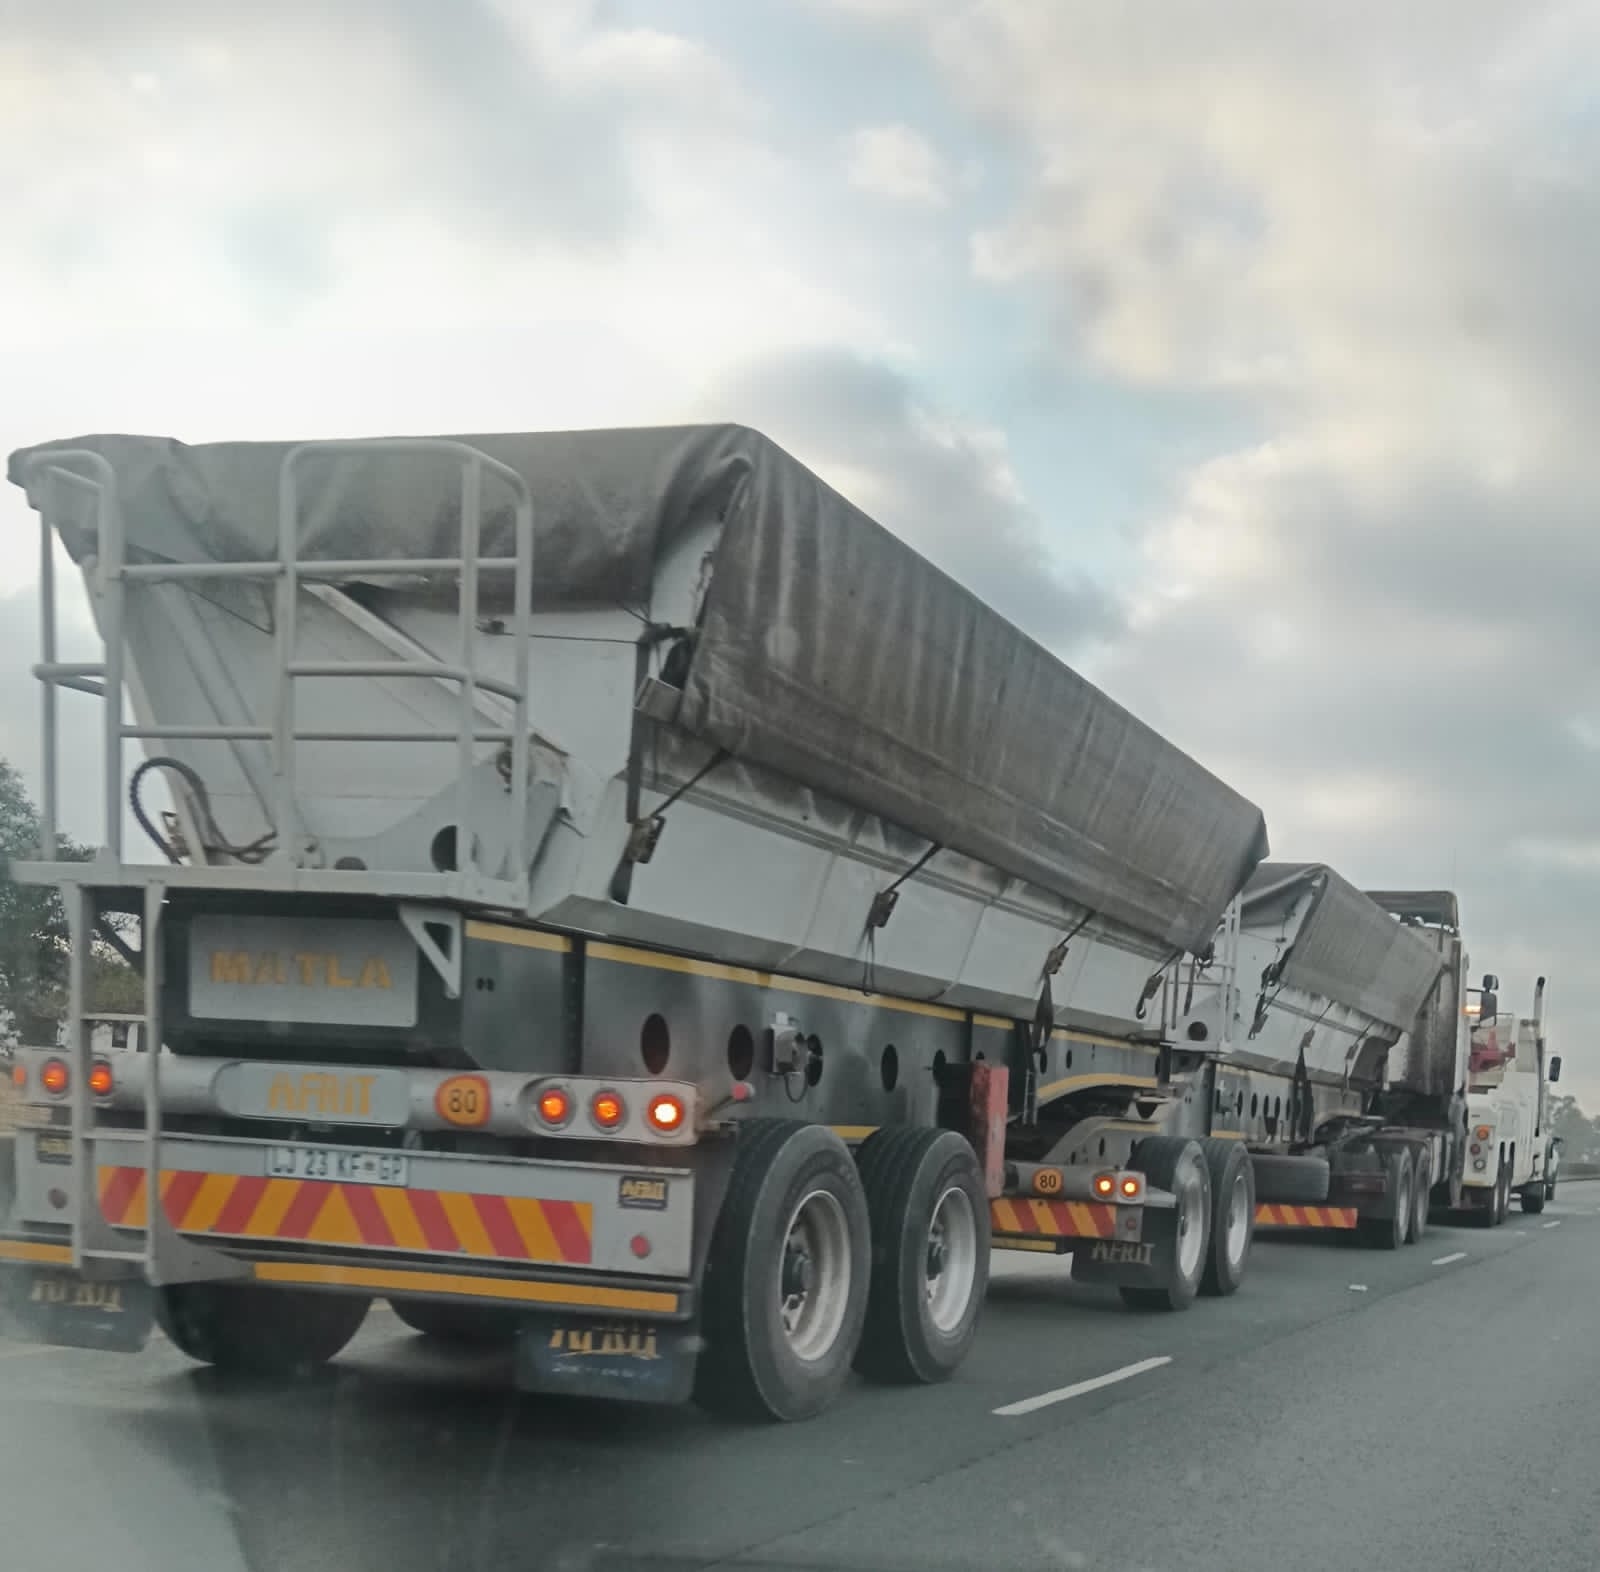 A truck broke down on the N3 in Durban